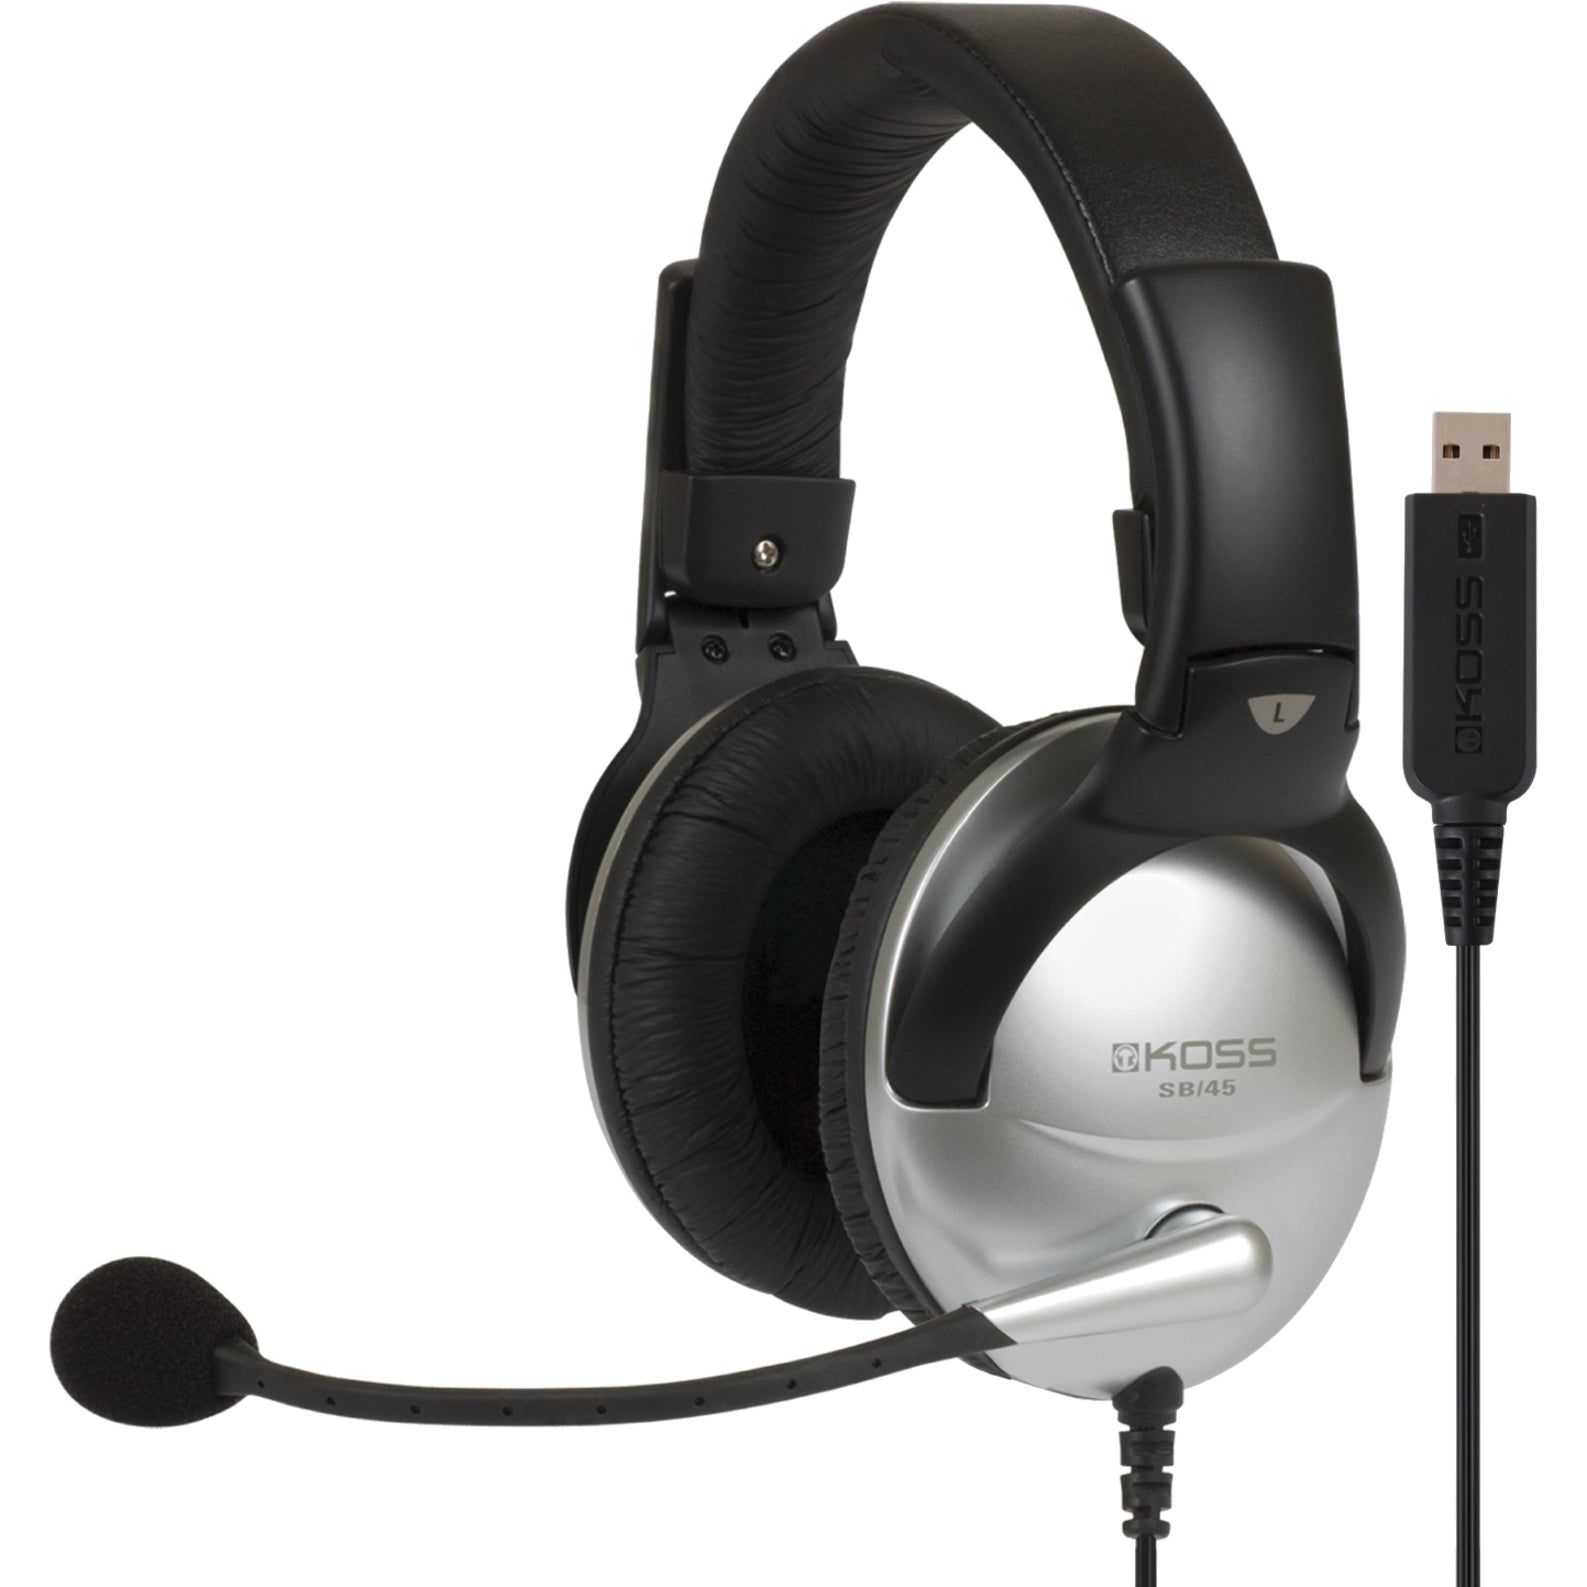 Koss 178203 SB45 USB Communication Headsets, Over-the-head Binaural Headset with Noise Reduction